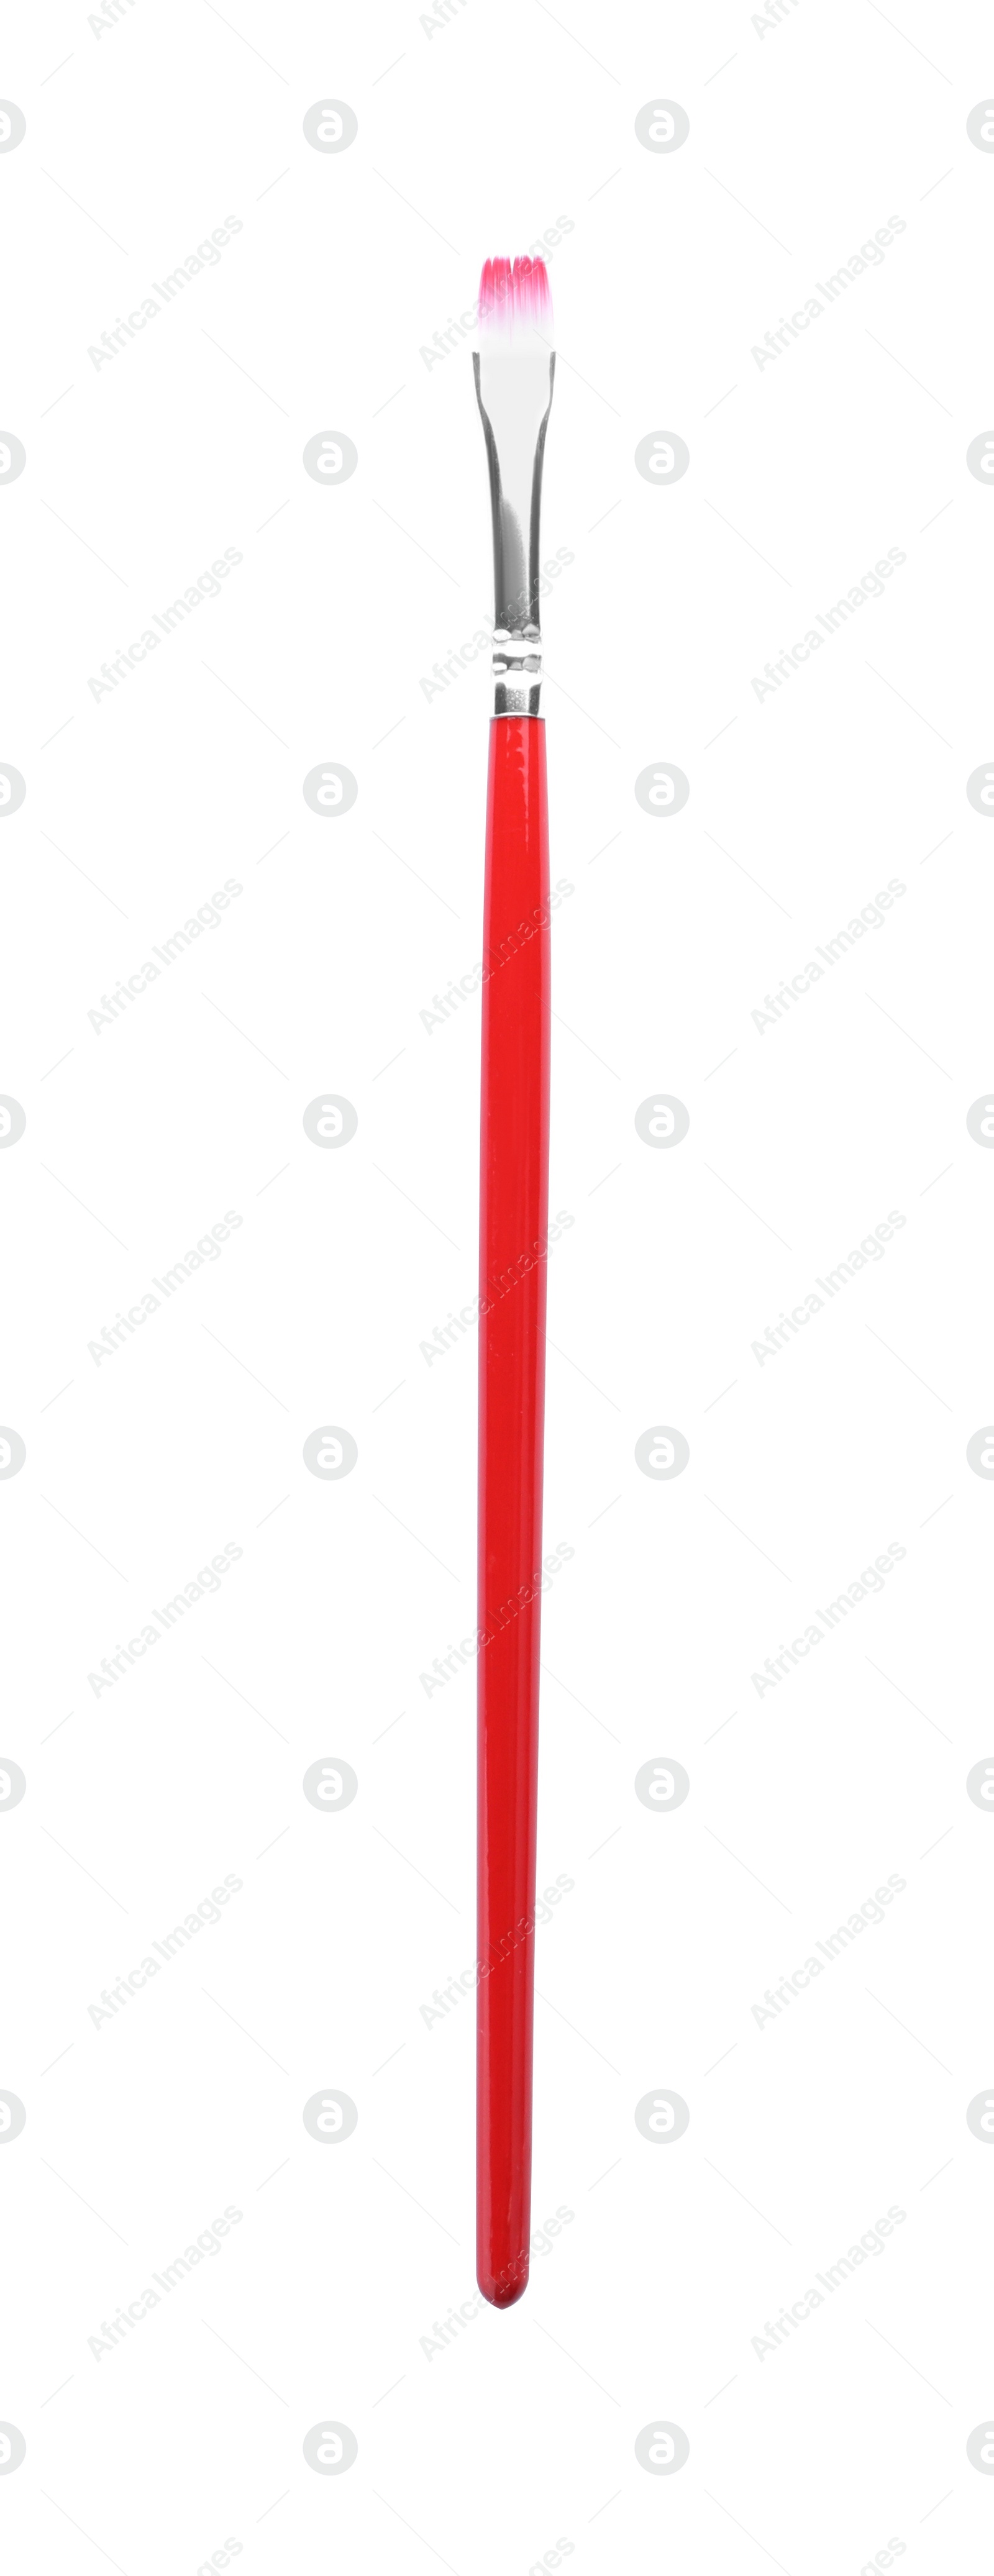 Photo of New brush for painting isolated on white. School stationery